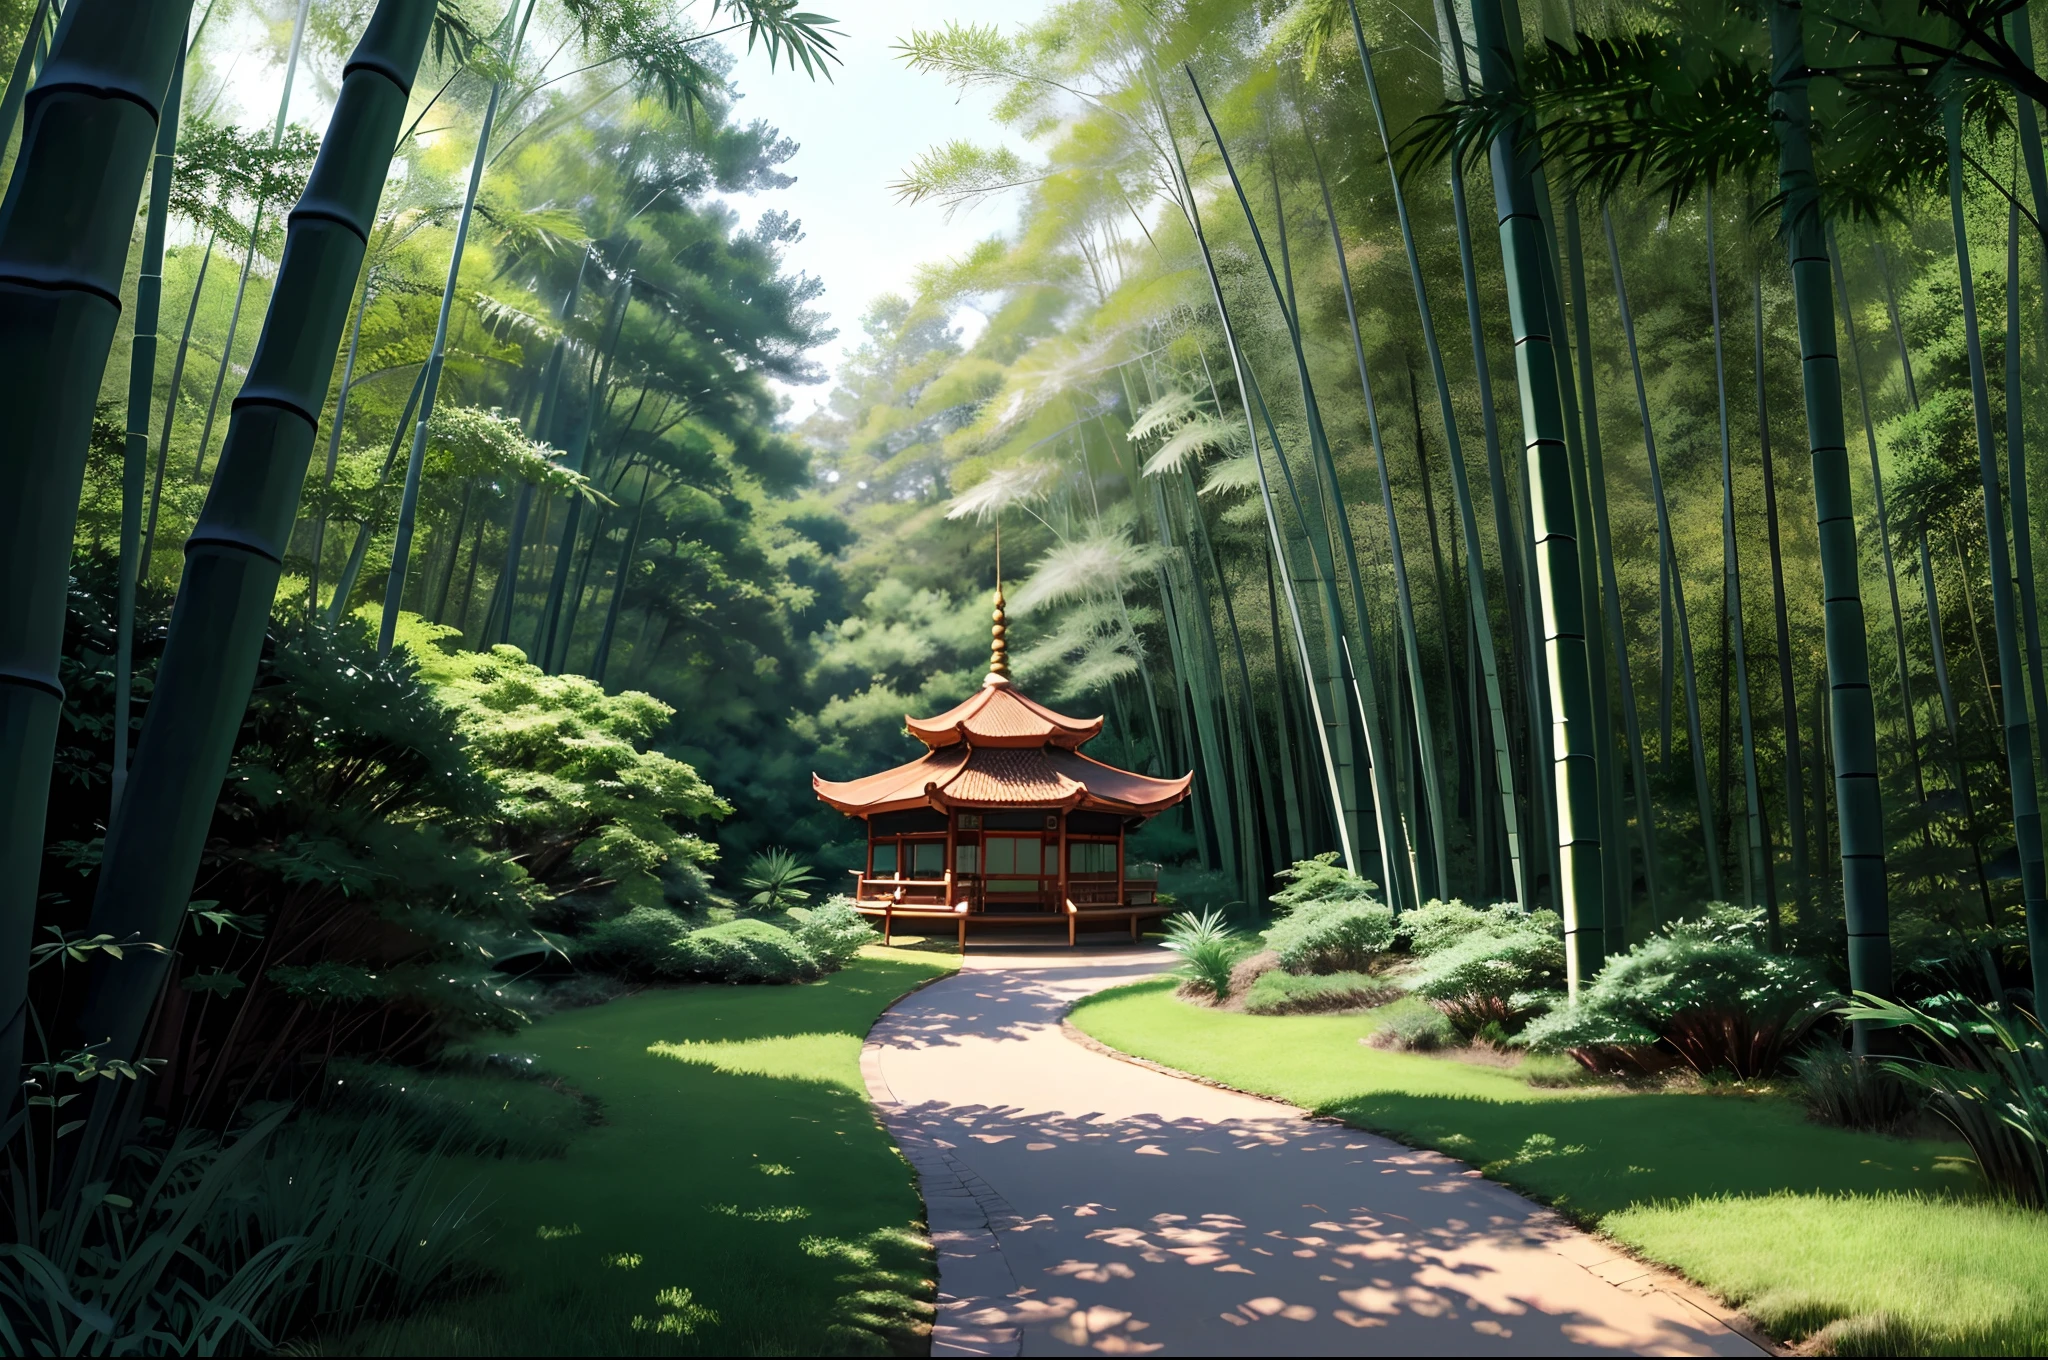 { {best qualtiy}}、{ {tmasterpiece}}、{ {ultra - detailed}}、{illustratio}、{Detailed light}、{Extremely Delicately Beautiful} Love Day in Forest Architecture，bamboo forrest，Close-up bamboo，There is a small pavilion in the middle of a path in the woods, digital painting of a pagoda, drawn in anime painter studio, beautiful anime scenery, anime beautiful peace scene, anime lush john 8k woods, Anime Nature, made with anime painter studio, quiet and serene atmosphere, Anime landscape, Anime landscapes, Tranquil lush forest, Anime background art